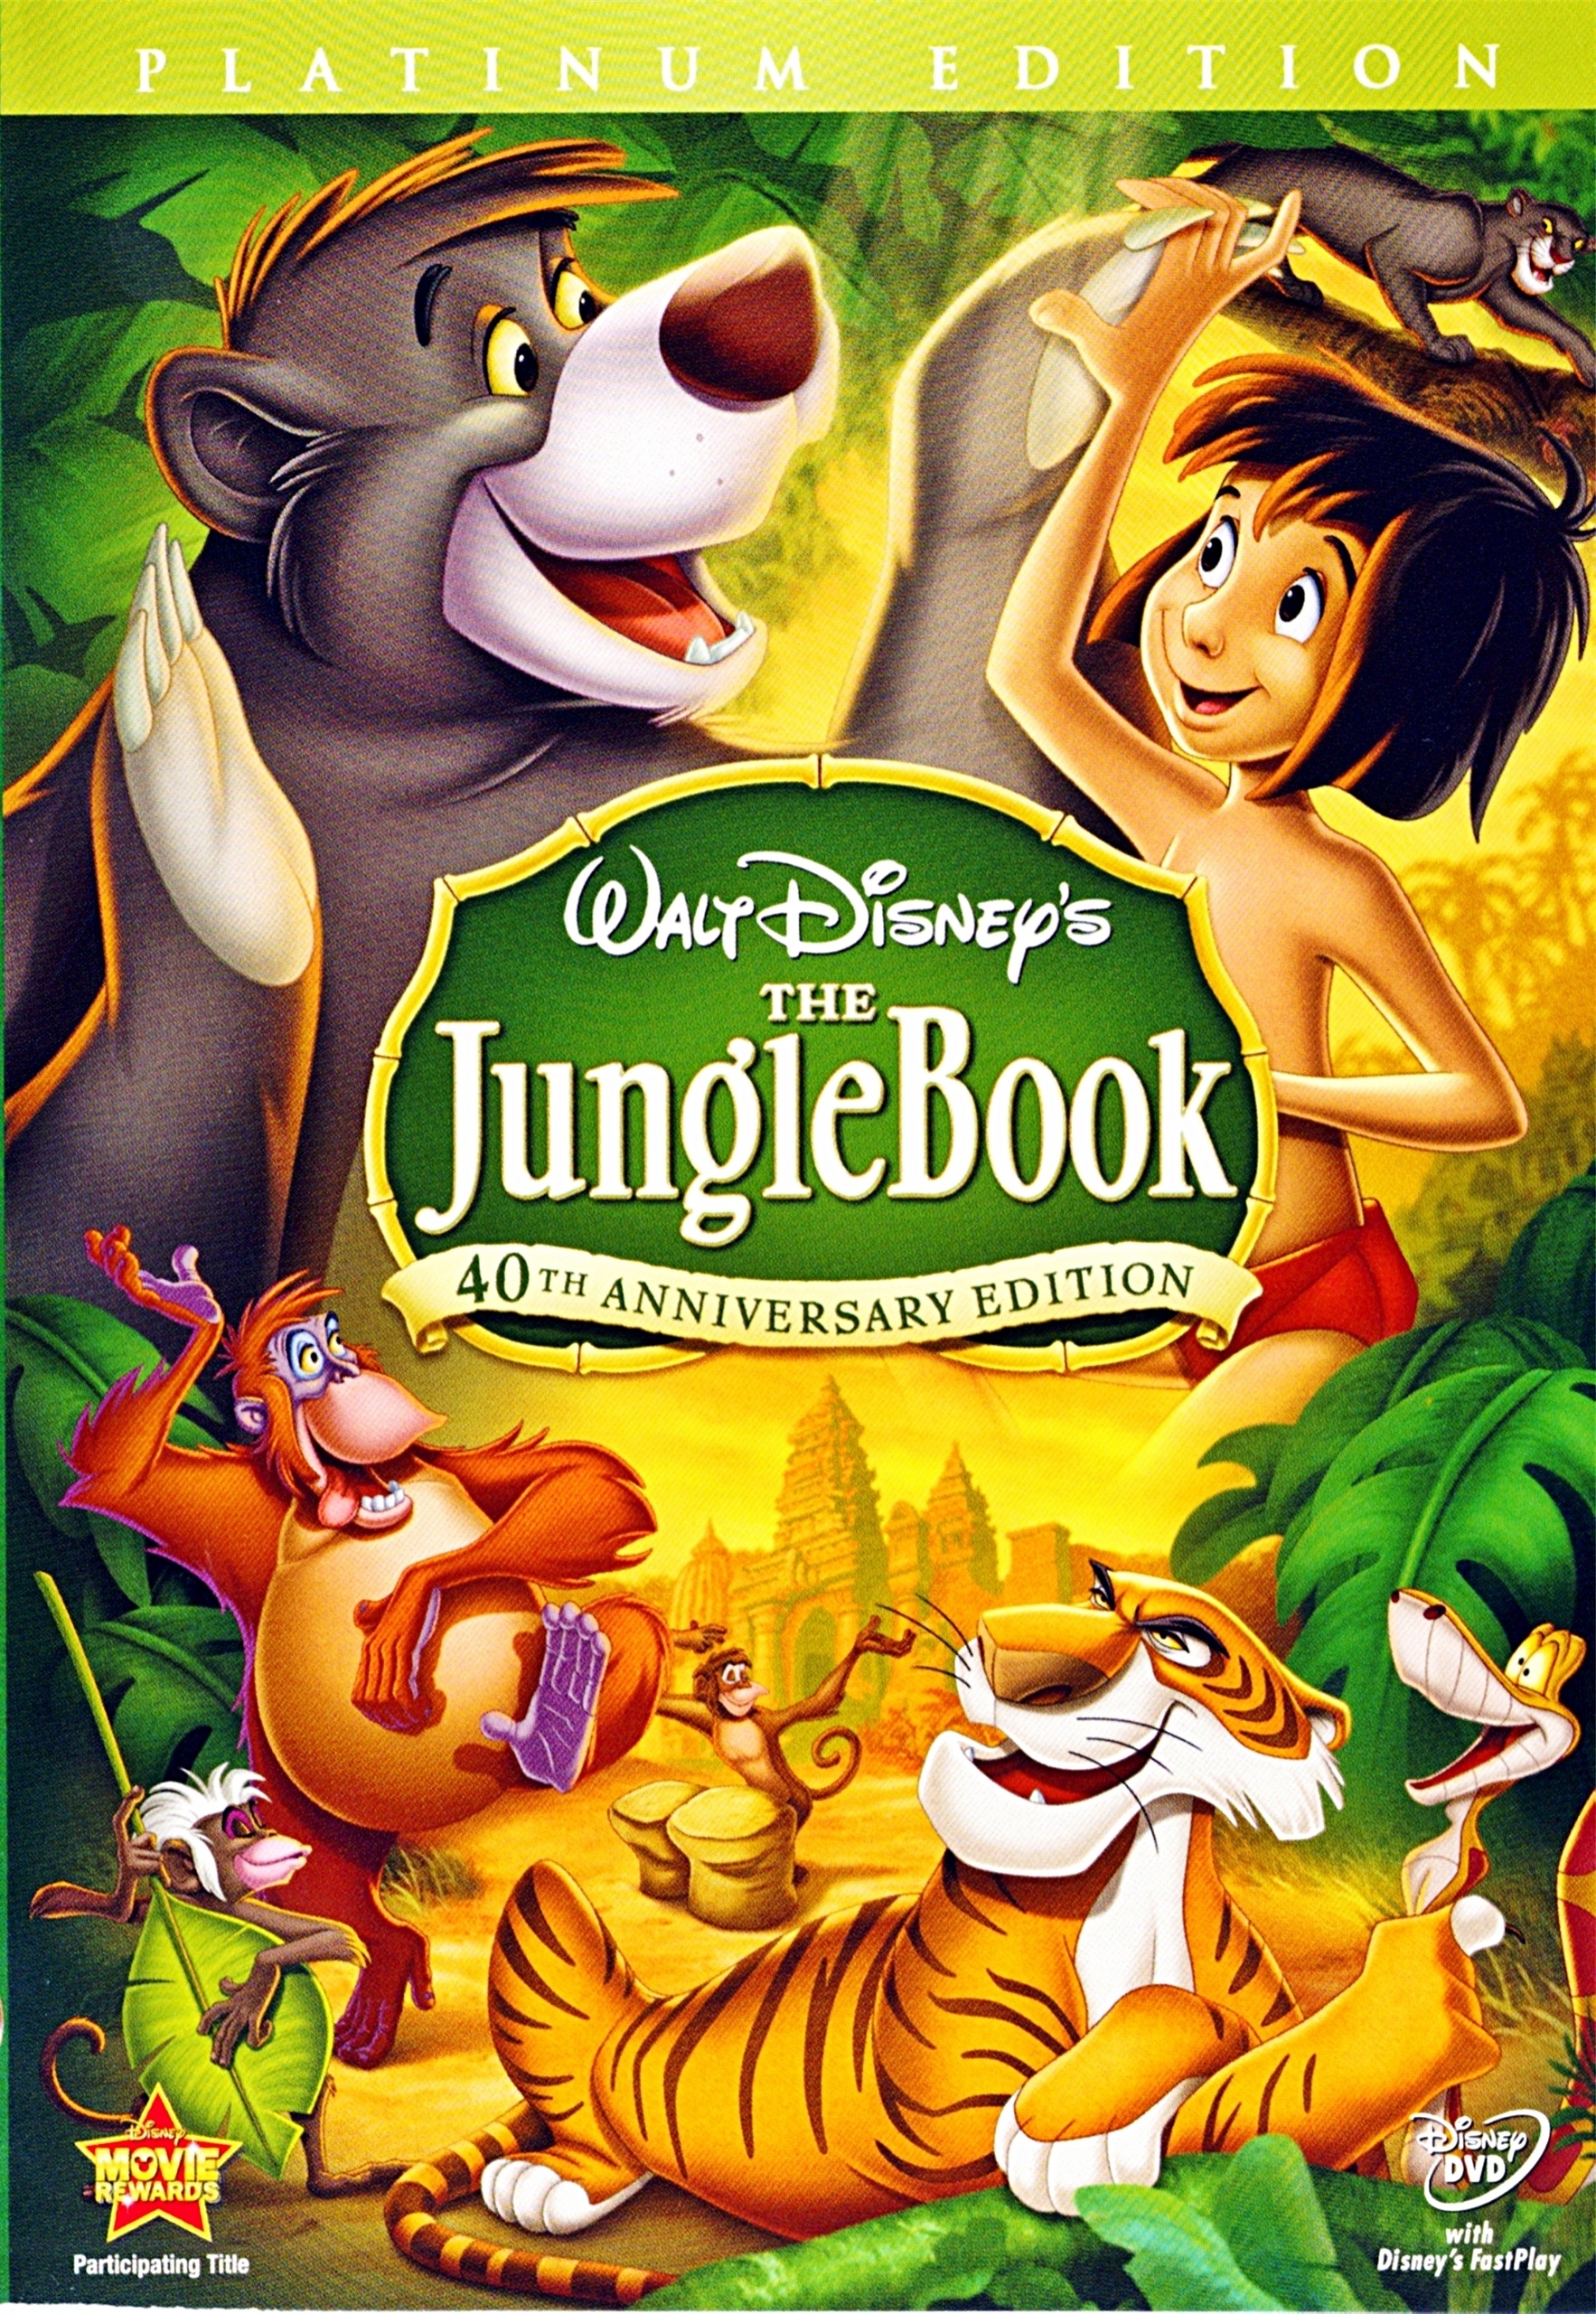 Disney dates Ghost in the Shell and Pete's Dragon, delays The Jungle Book –  Eggplante!